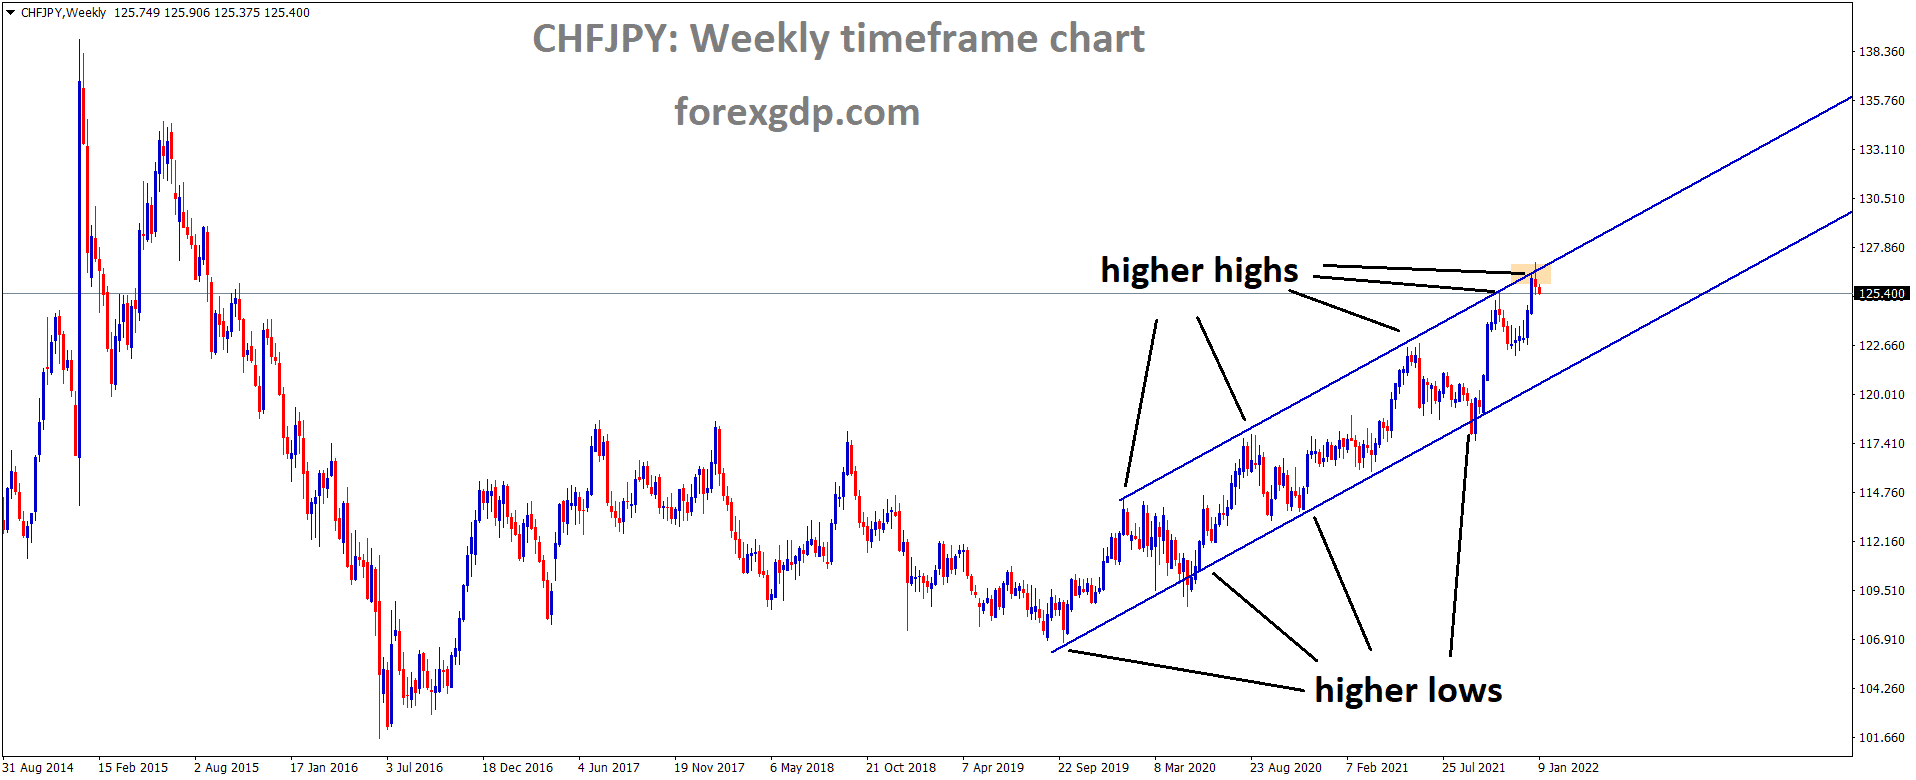 CHFJPY is moving in an Ascending channel and the market has fallen from the higher high area of the channel